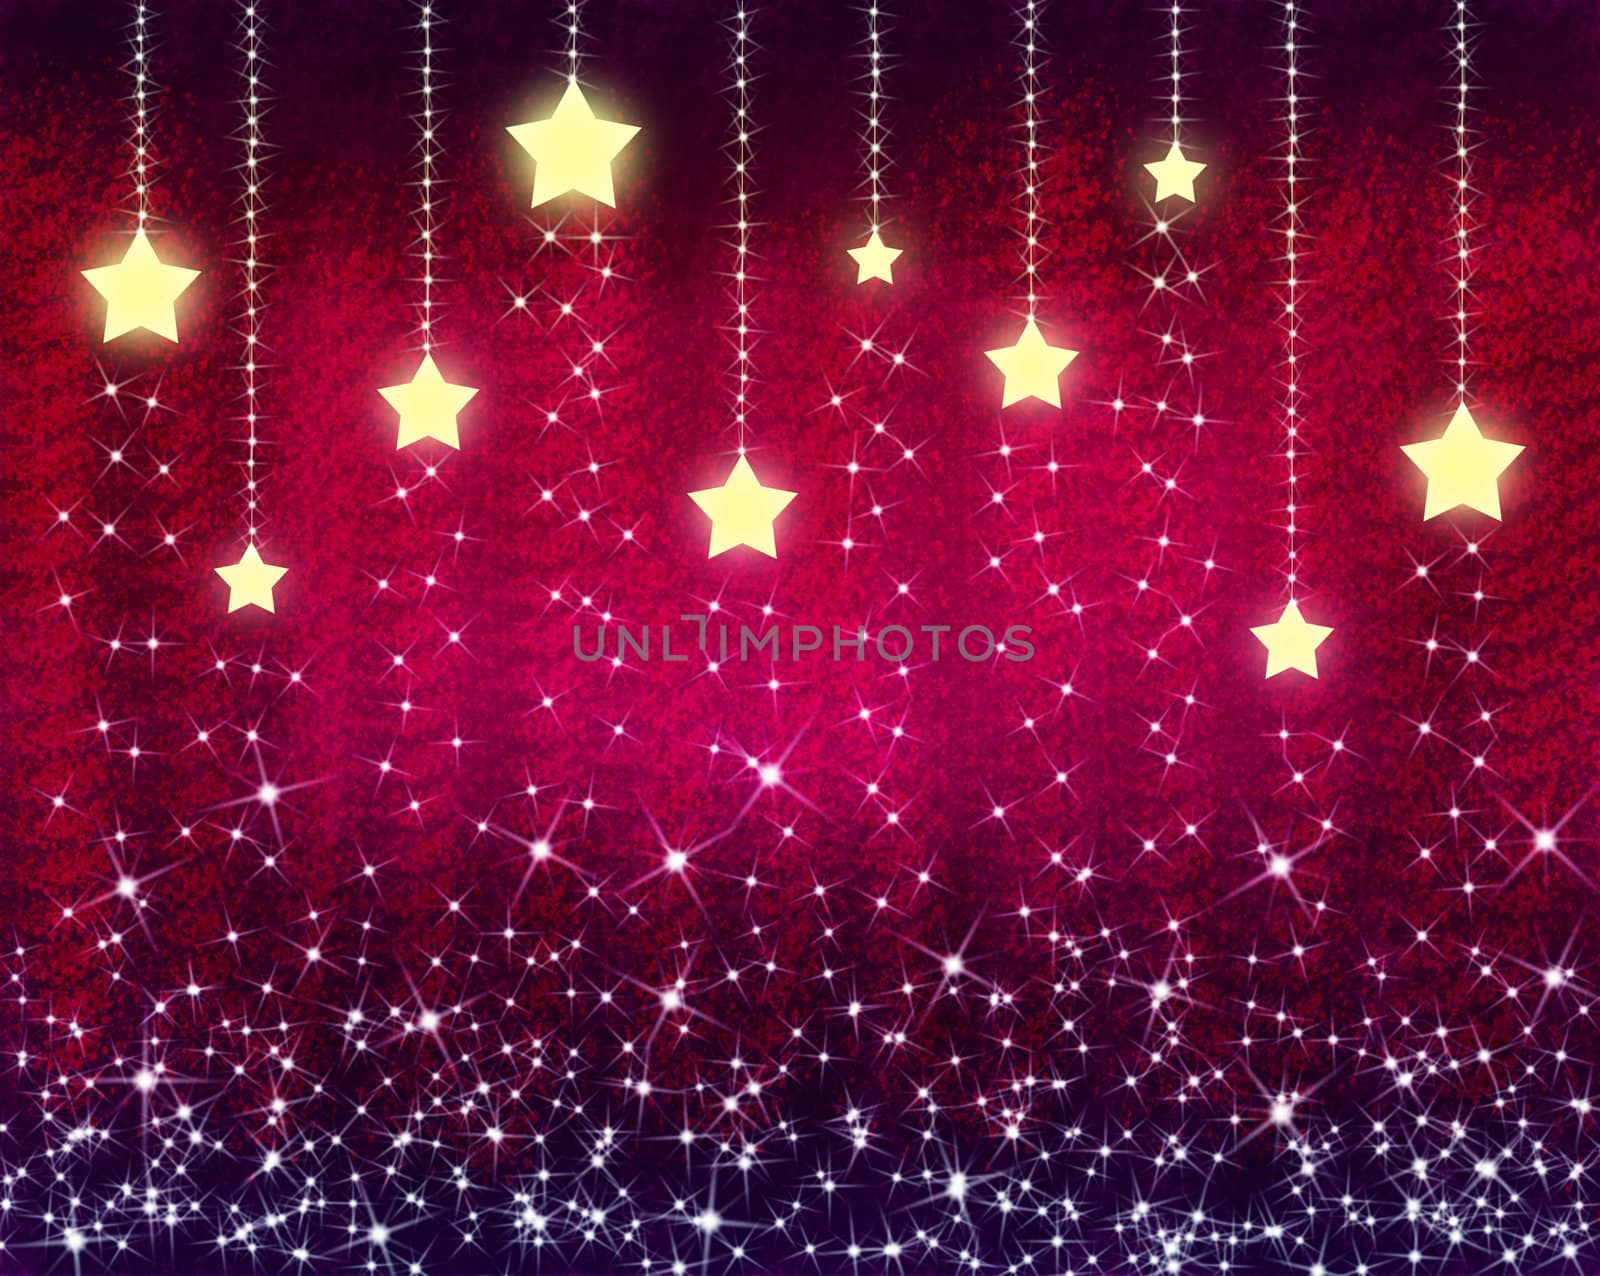 Background for new year and for Christmas